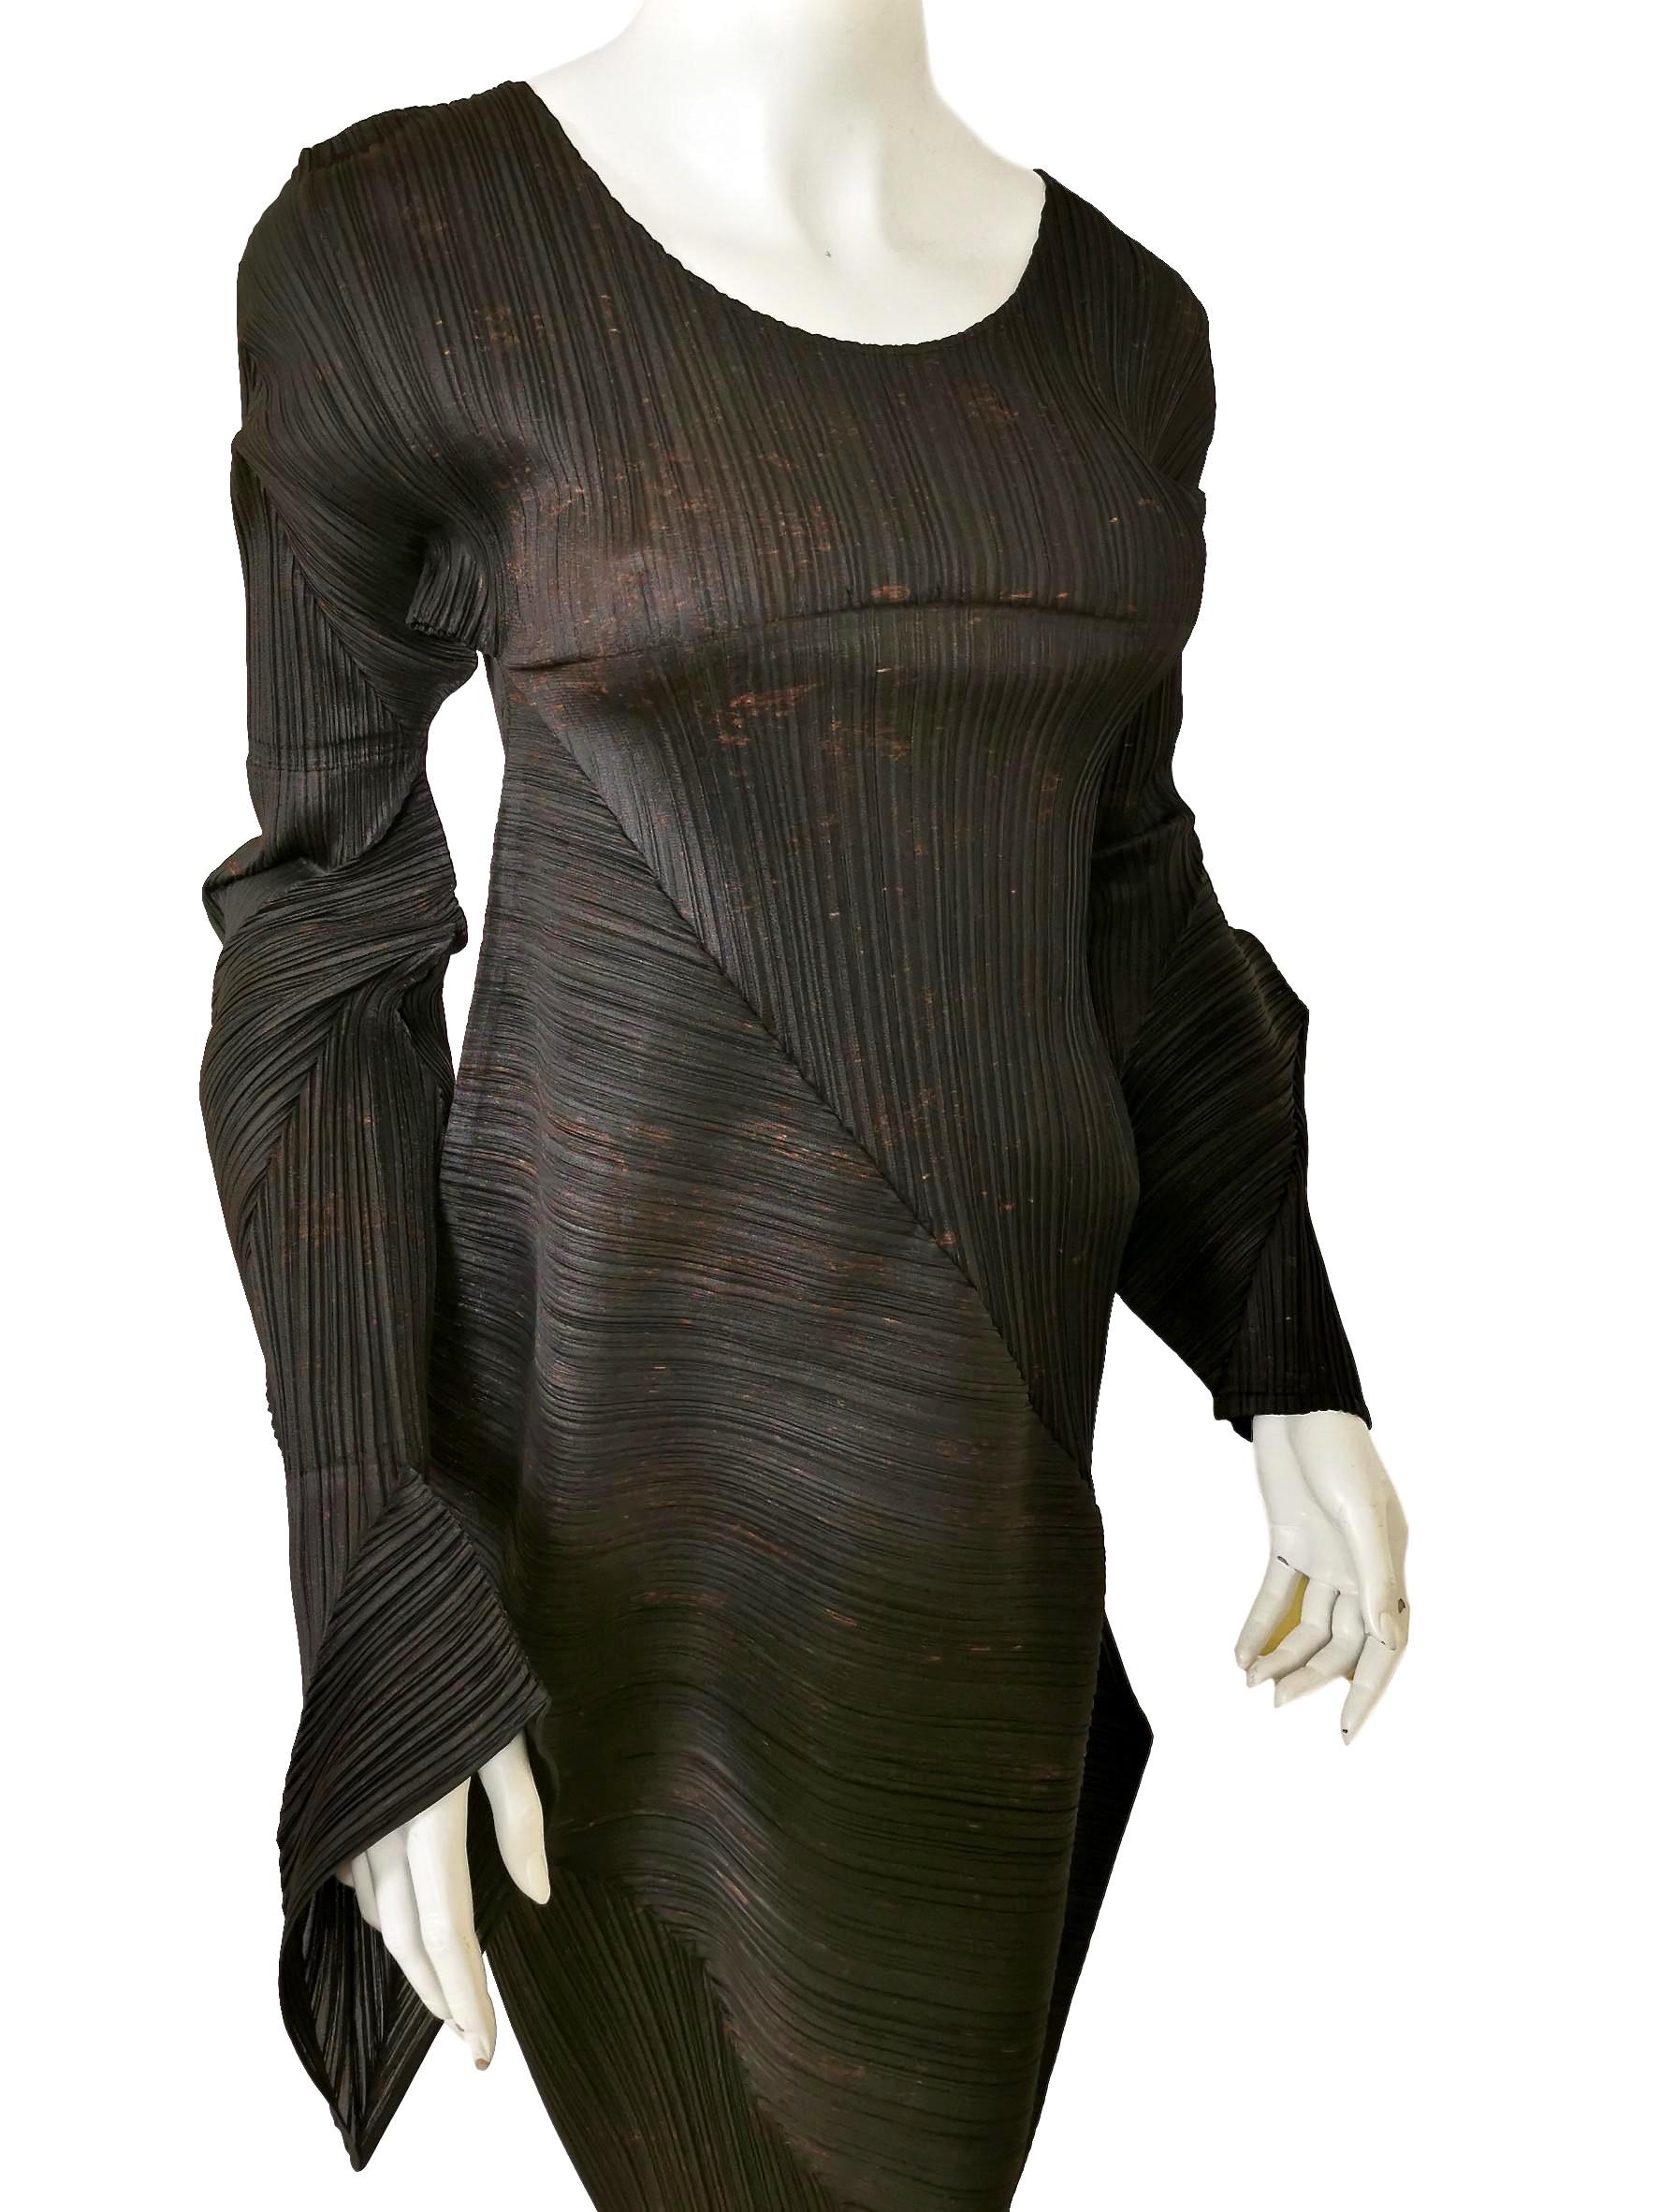 Issey Miyake Guest Artist Cai Guo Qiang Series Number 4 Serpentine Dress For Sale 1